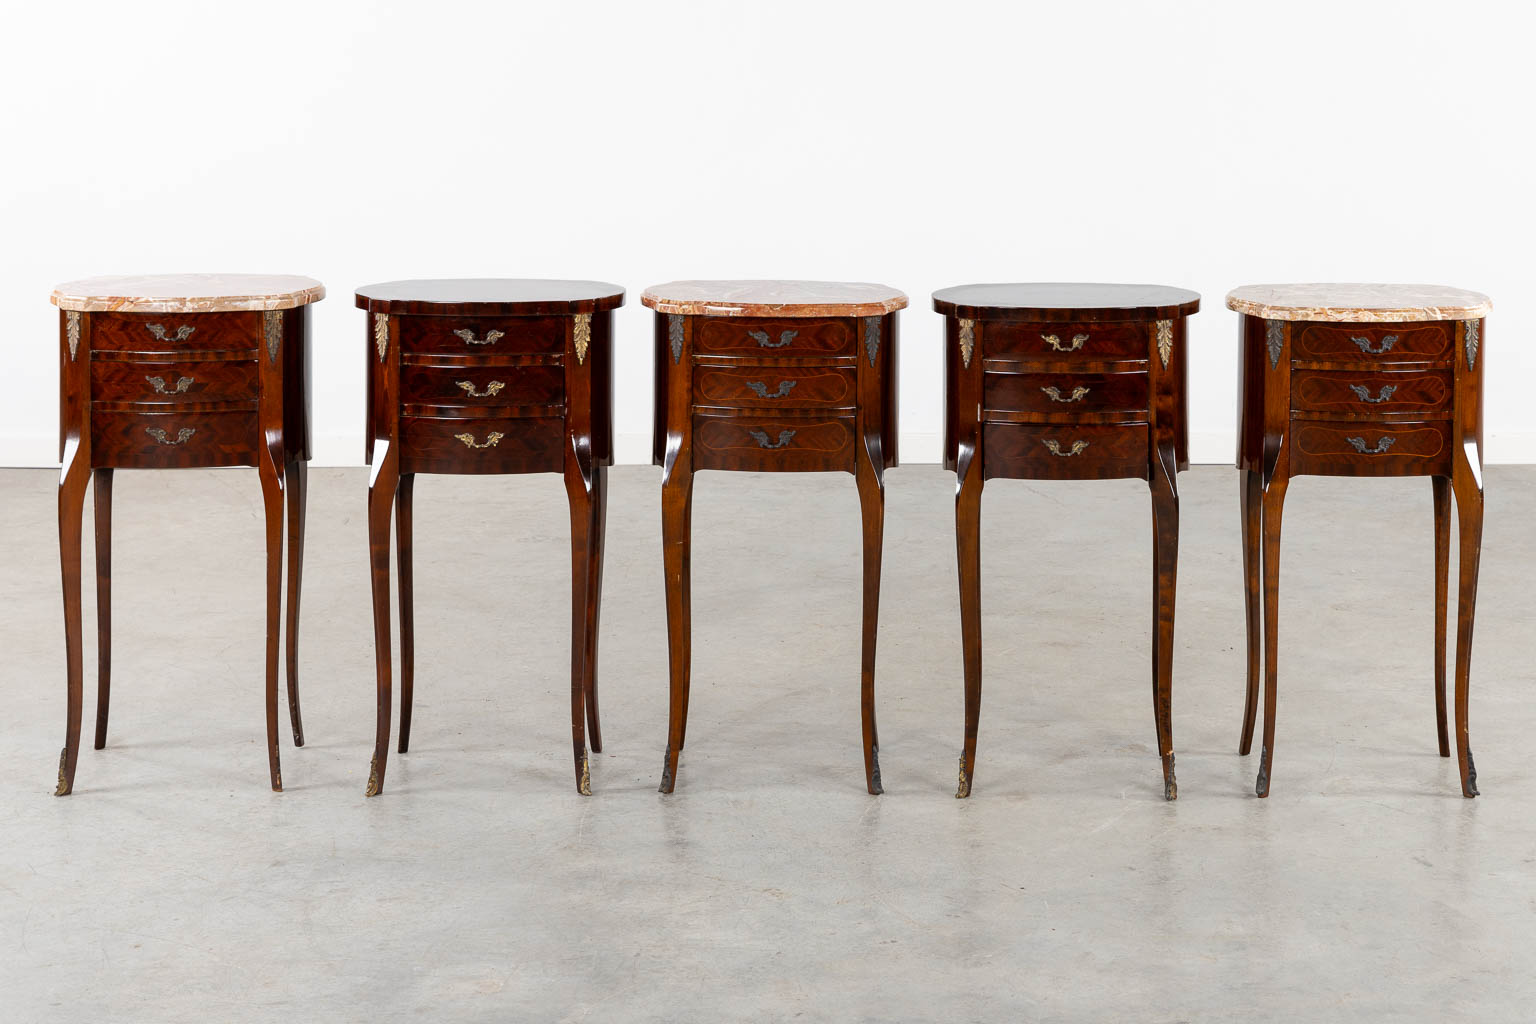 Five side tables or nightstands. (L:27 x W:40 x H:72 cm) - Image 4 of 14